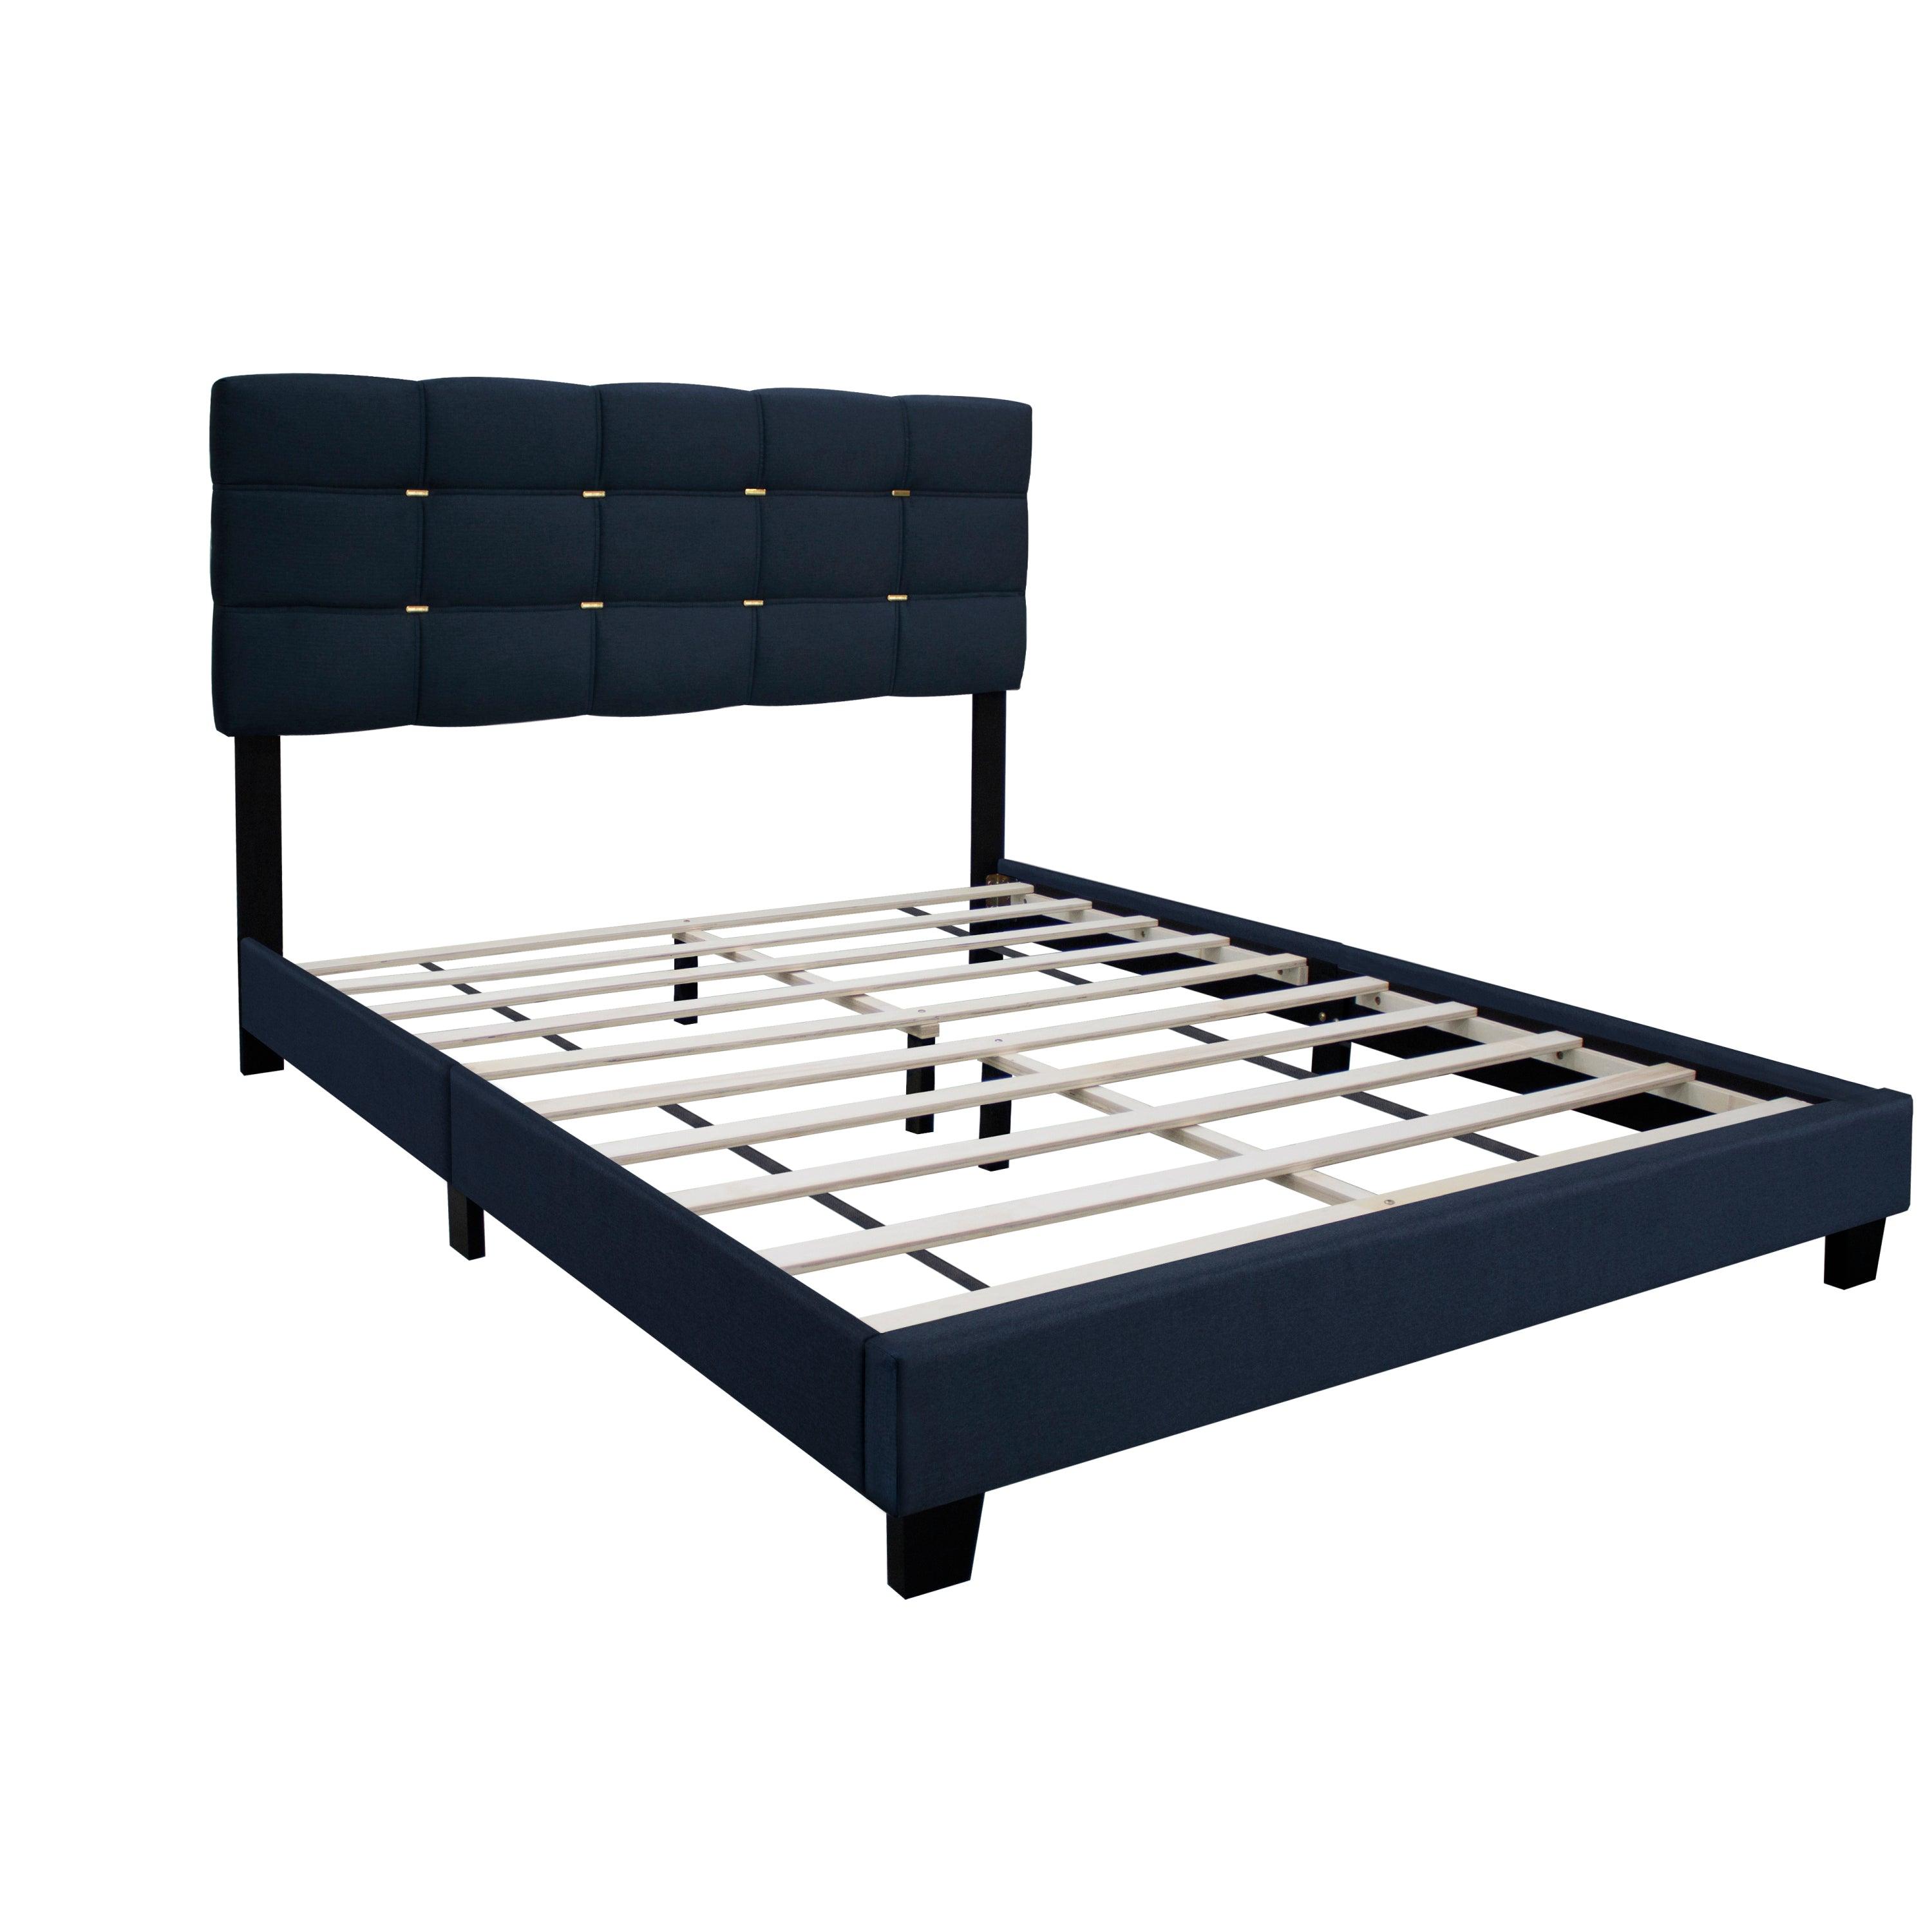 🆓🚛 The Black Series Queen Size Adjustable Upholstered Bed Frame With Gold Accents on The Headboard Has An Elegant Look and Requires no Springs!